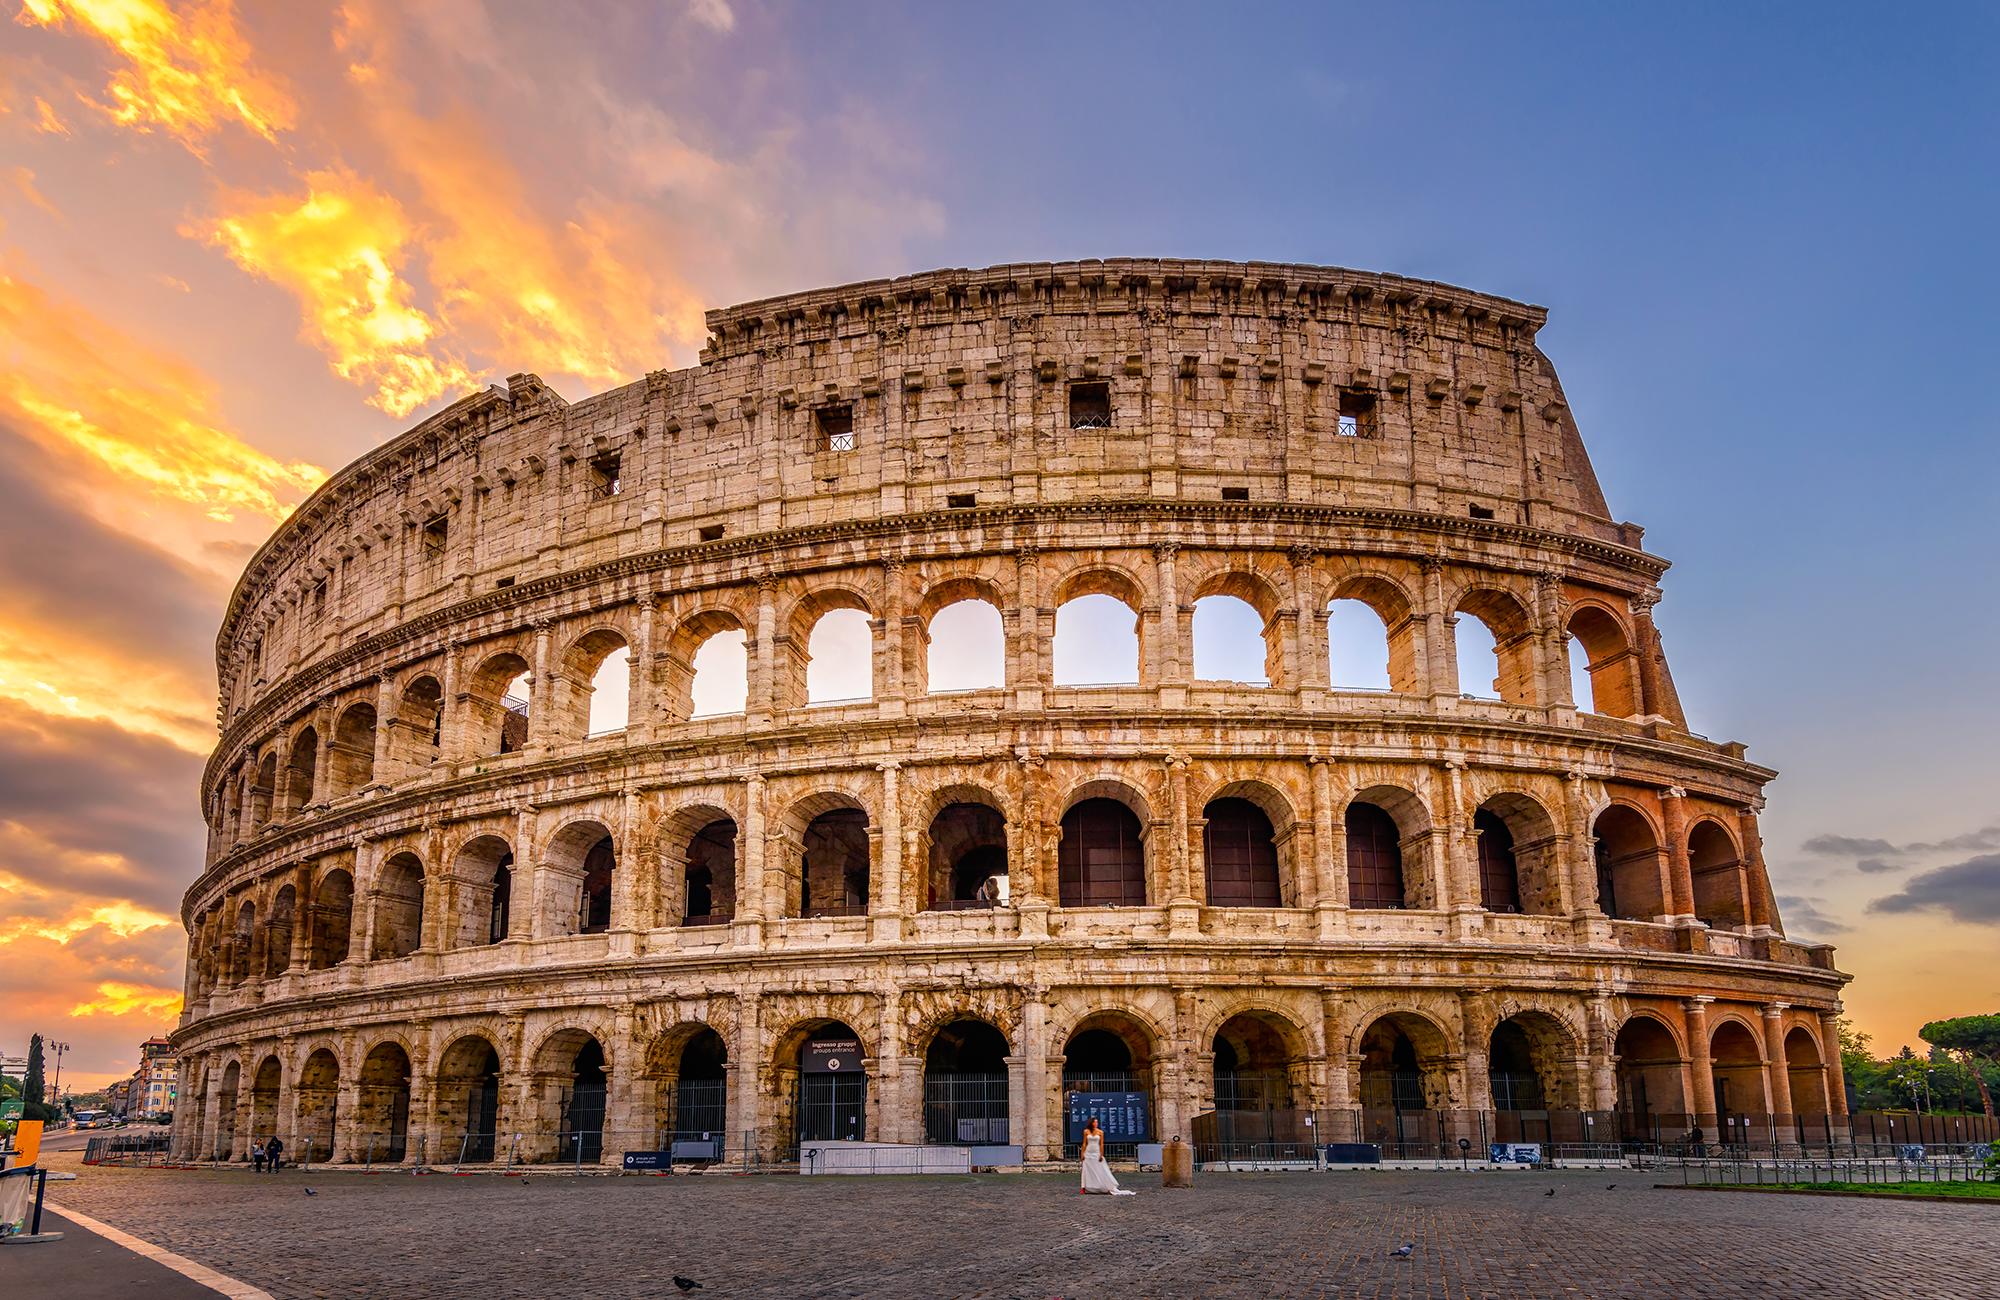 New Jersey to Rome Italy $392 RT Airfares on TAP Air Portugal (Travel September - March 2022)